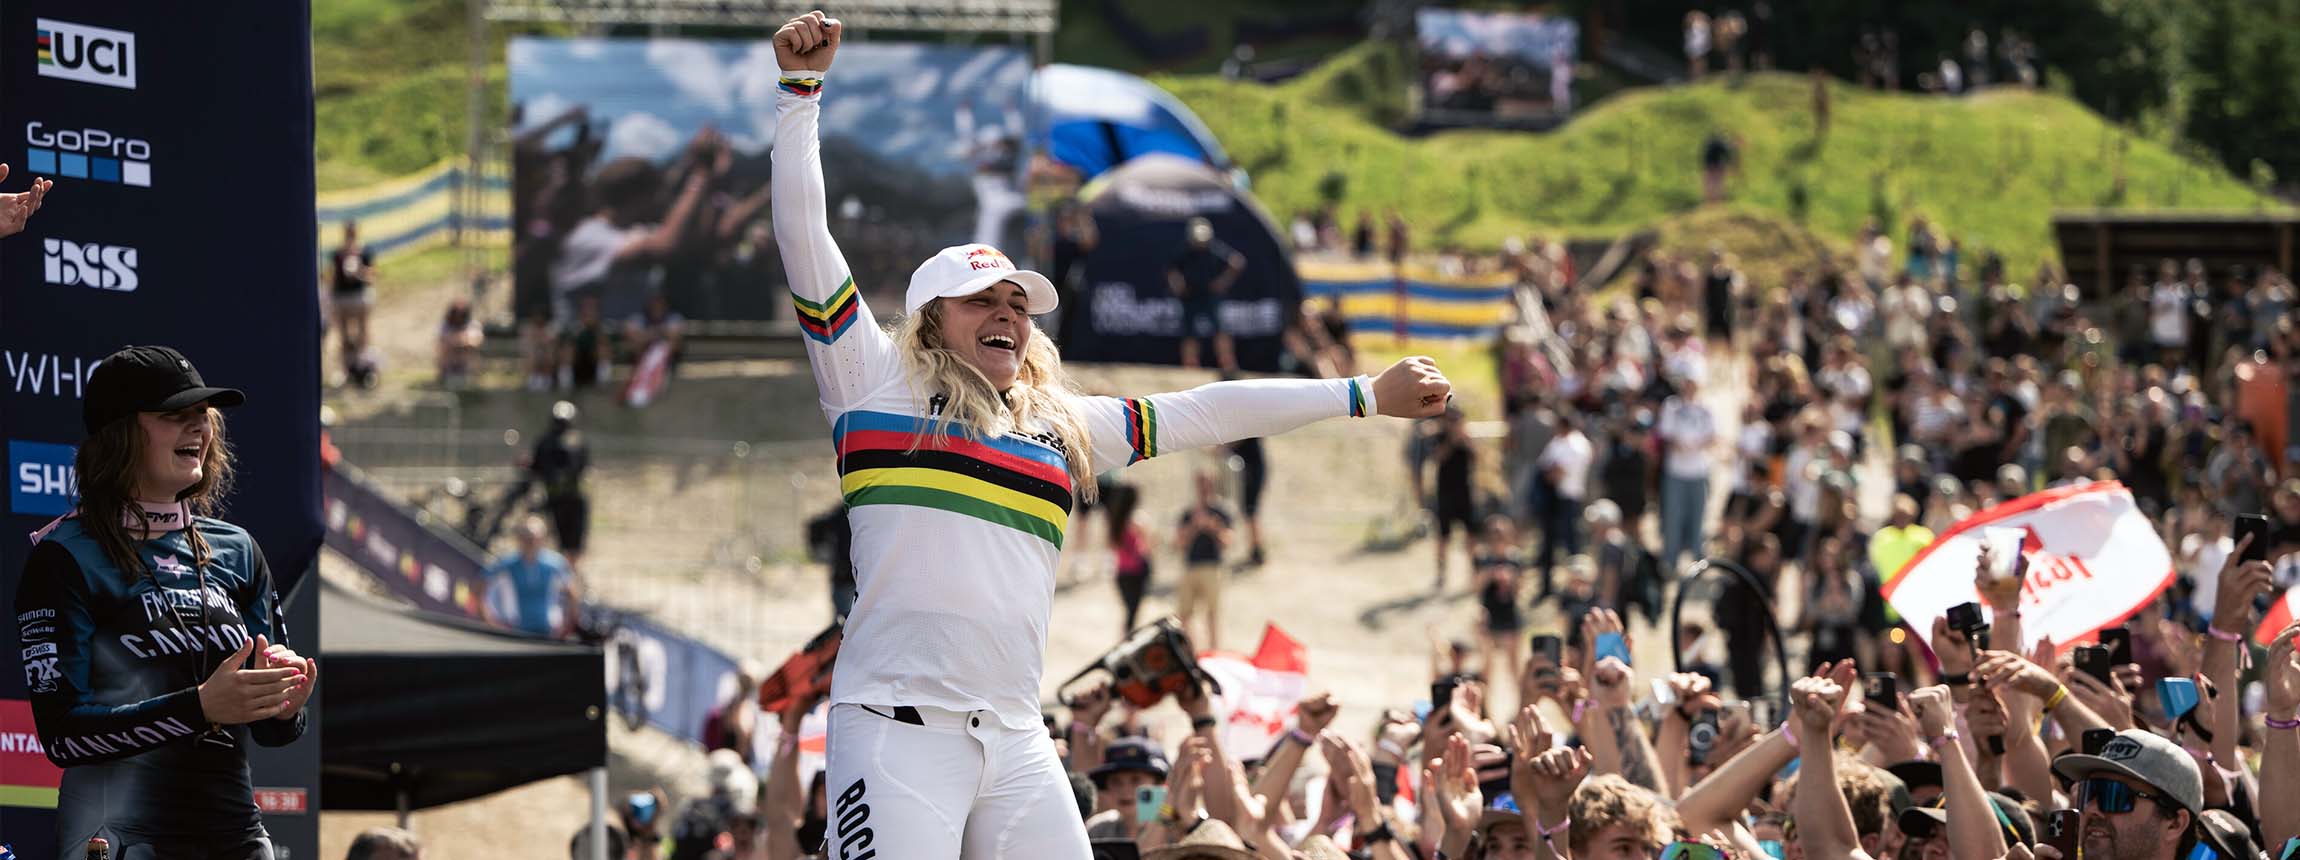 Vali holl celebrates at uci dh world cup in leogang, austria on june 17, 2023